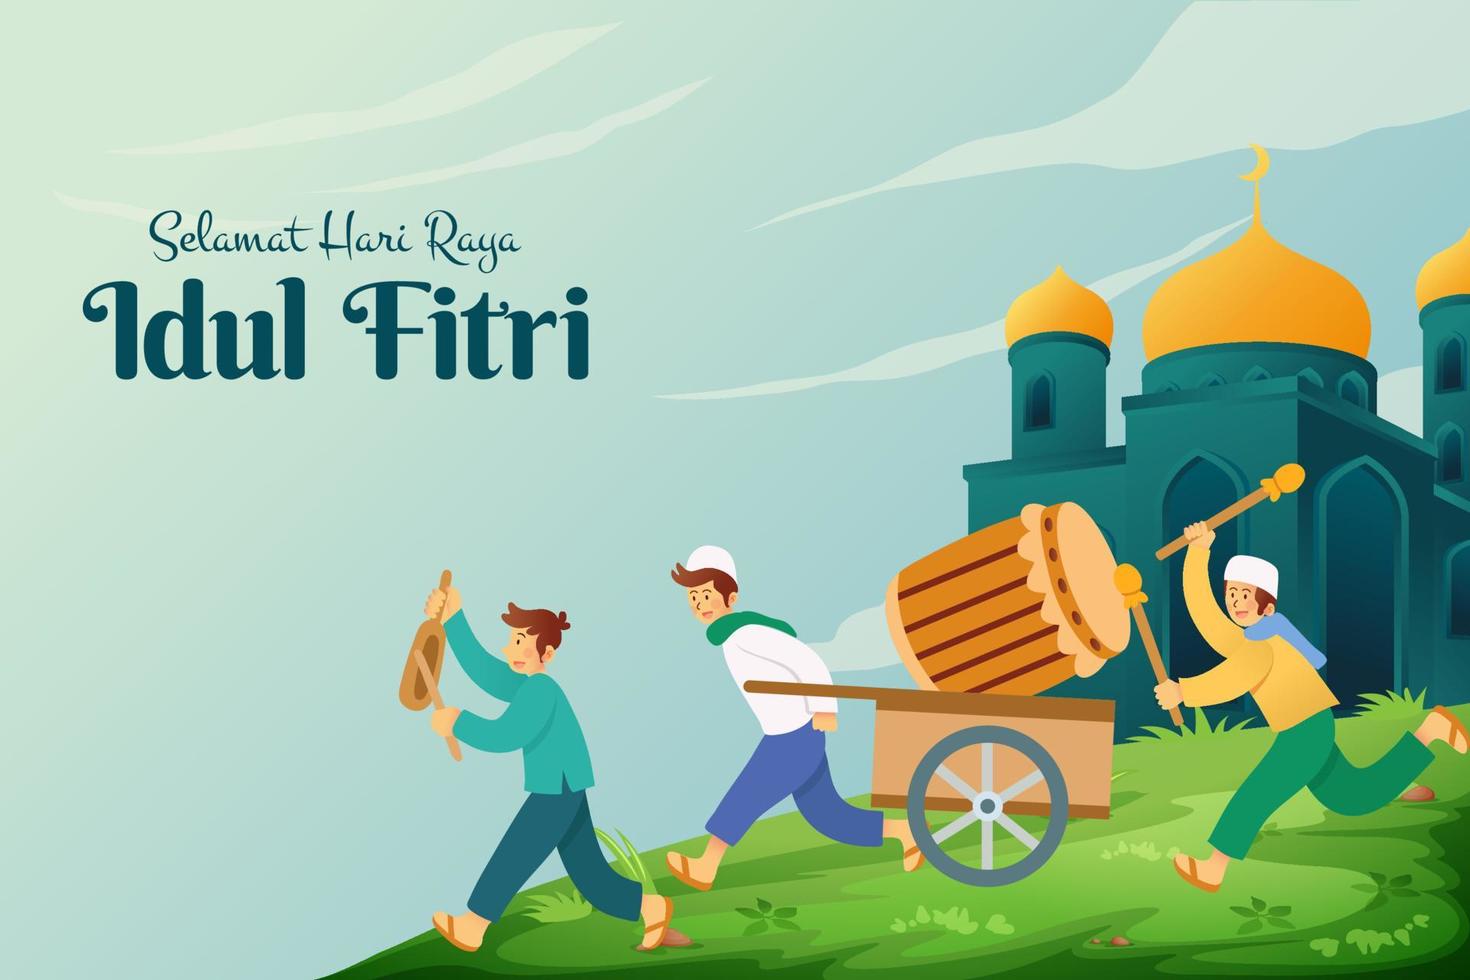 elamat hari raya Idul Fitri, translation happy eid mubarak with a group of youngster parading a big wooden drum to to celebrate eid mubarak in the night vector